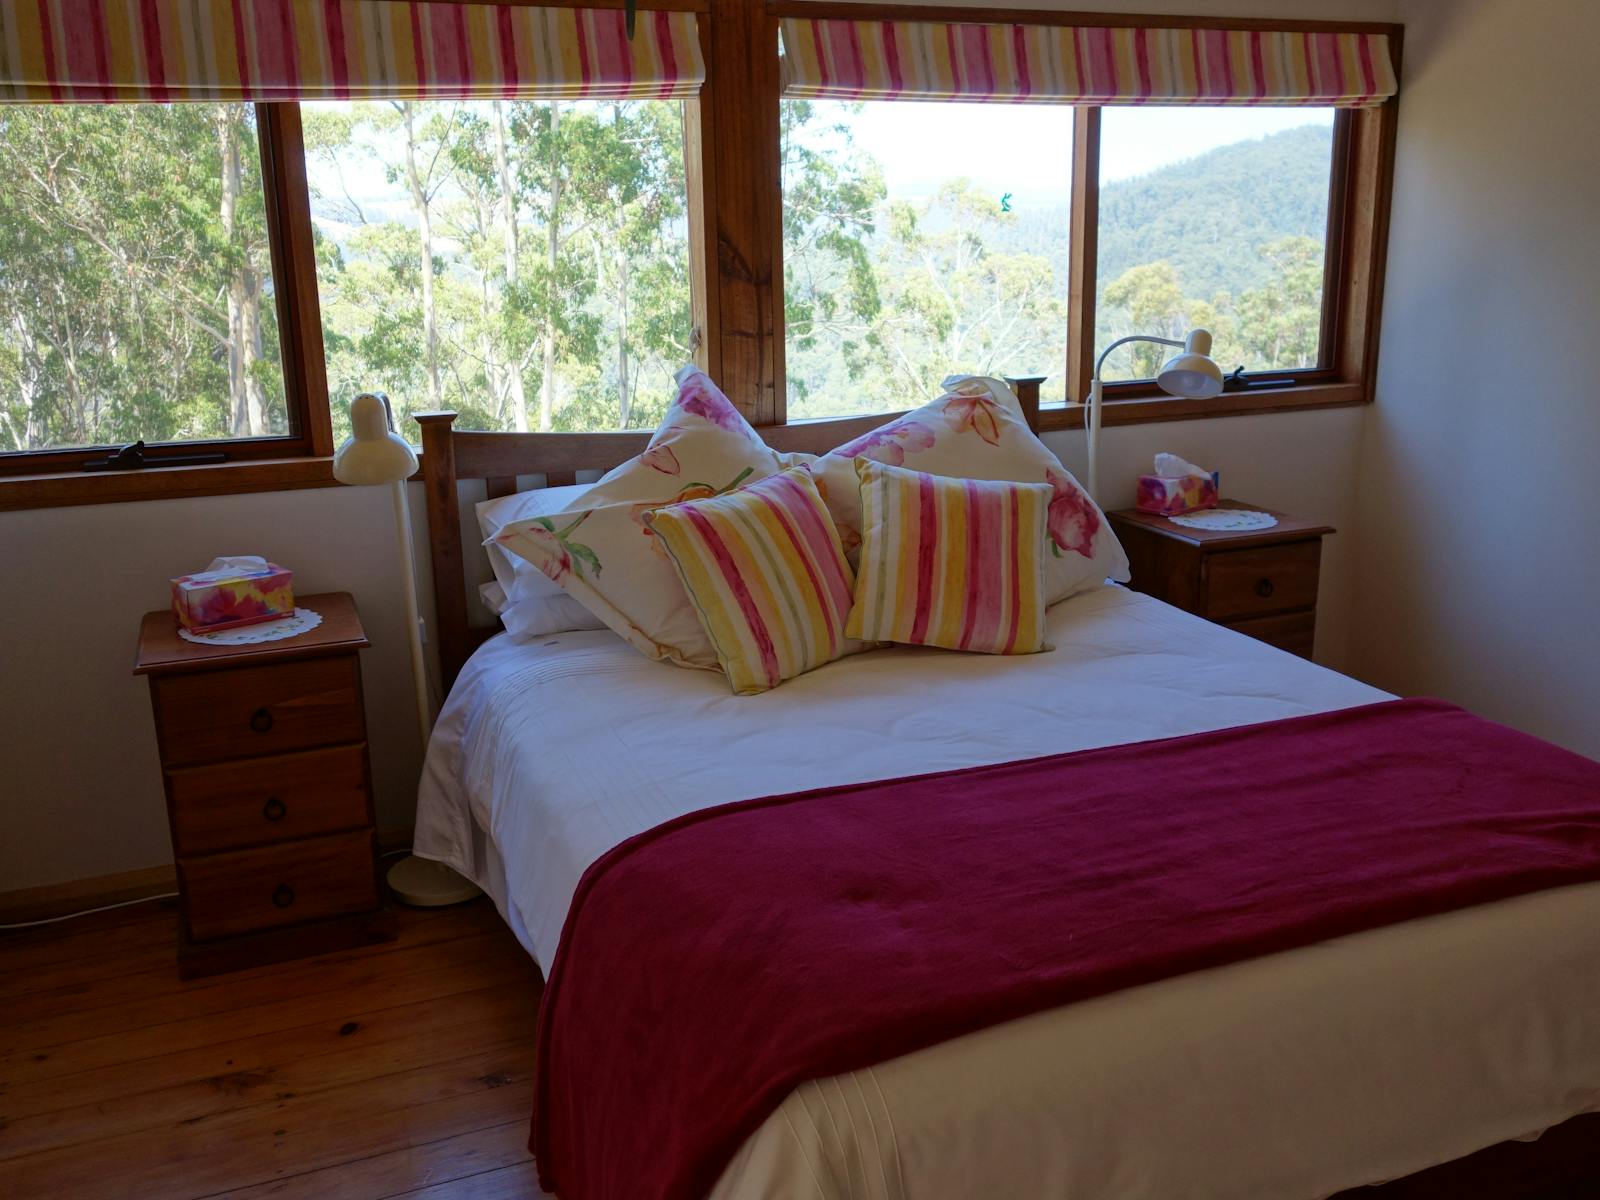 This bedroom also has spectacular views to the south overlooking Black Bluff.